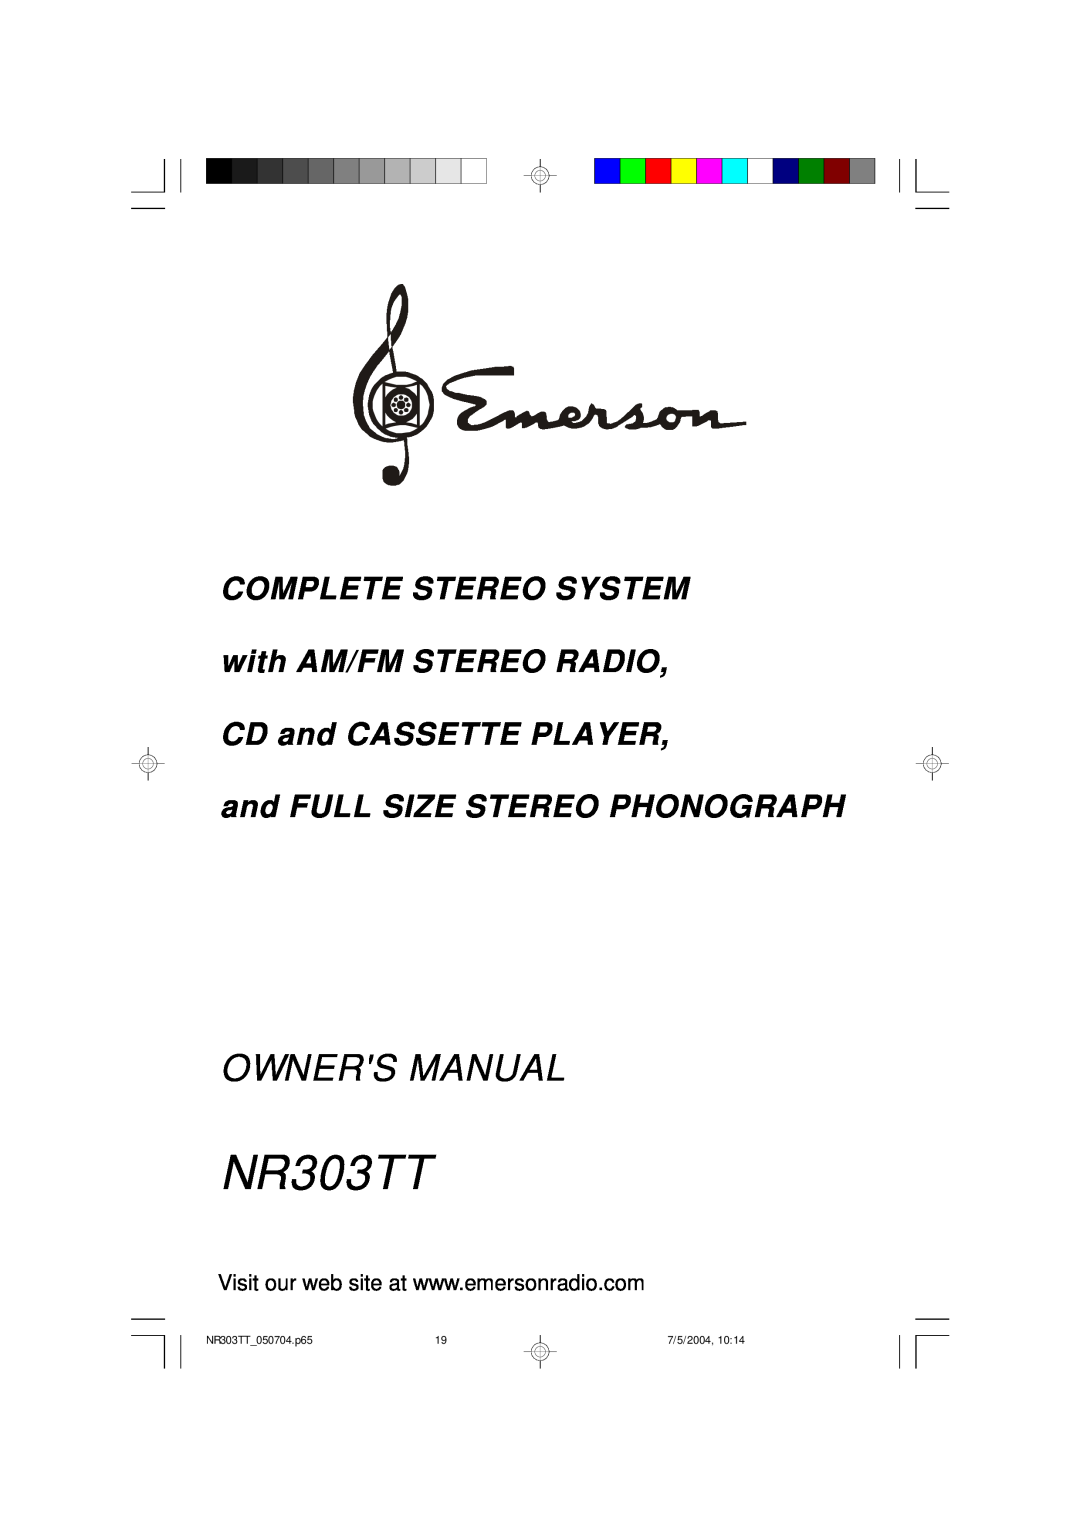 Emerson owner manual and FULL SIZE STEREO PHONOGRAPH, NR303TT 050704.p65, 7/5/2004 